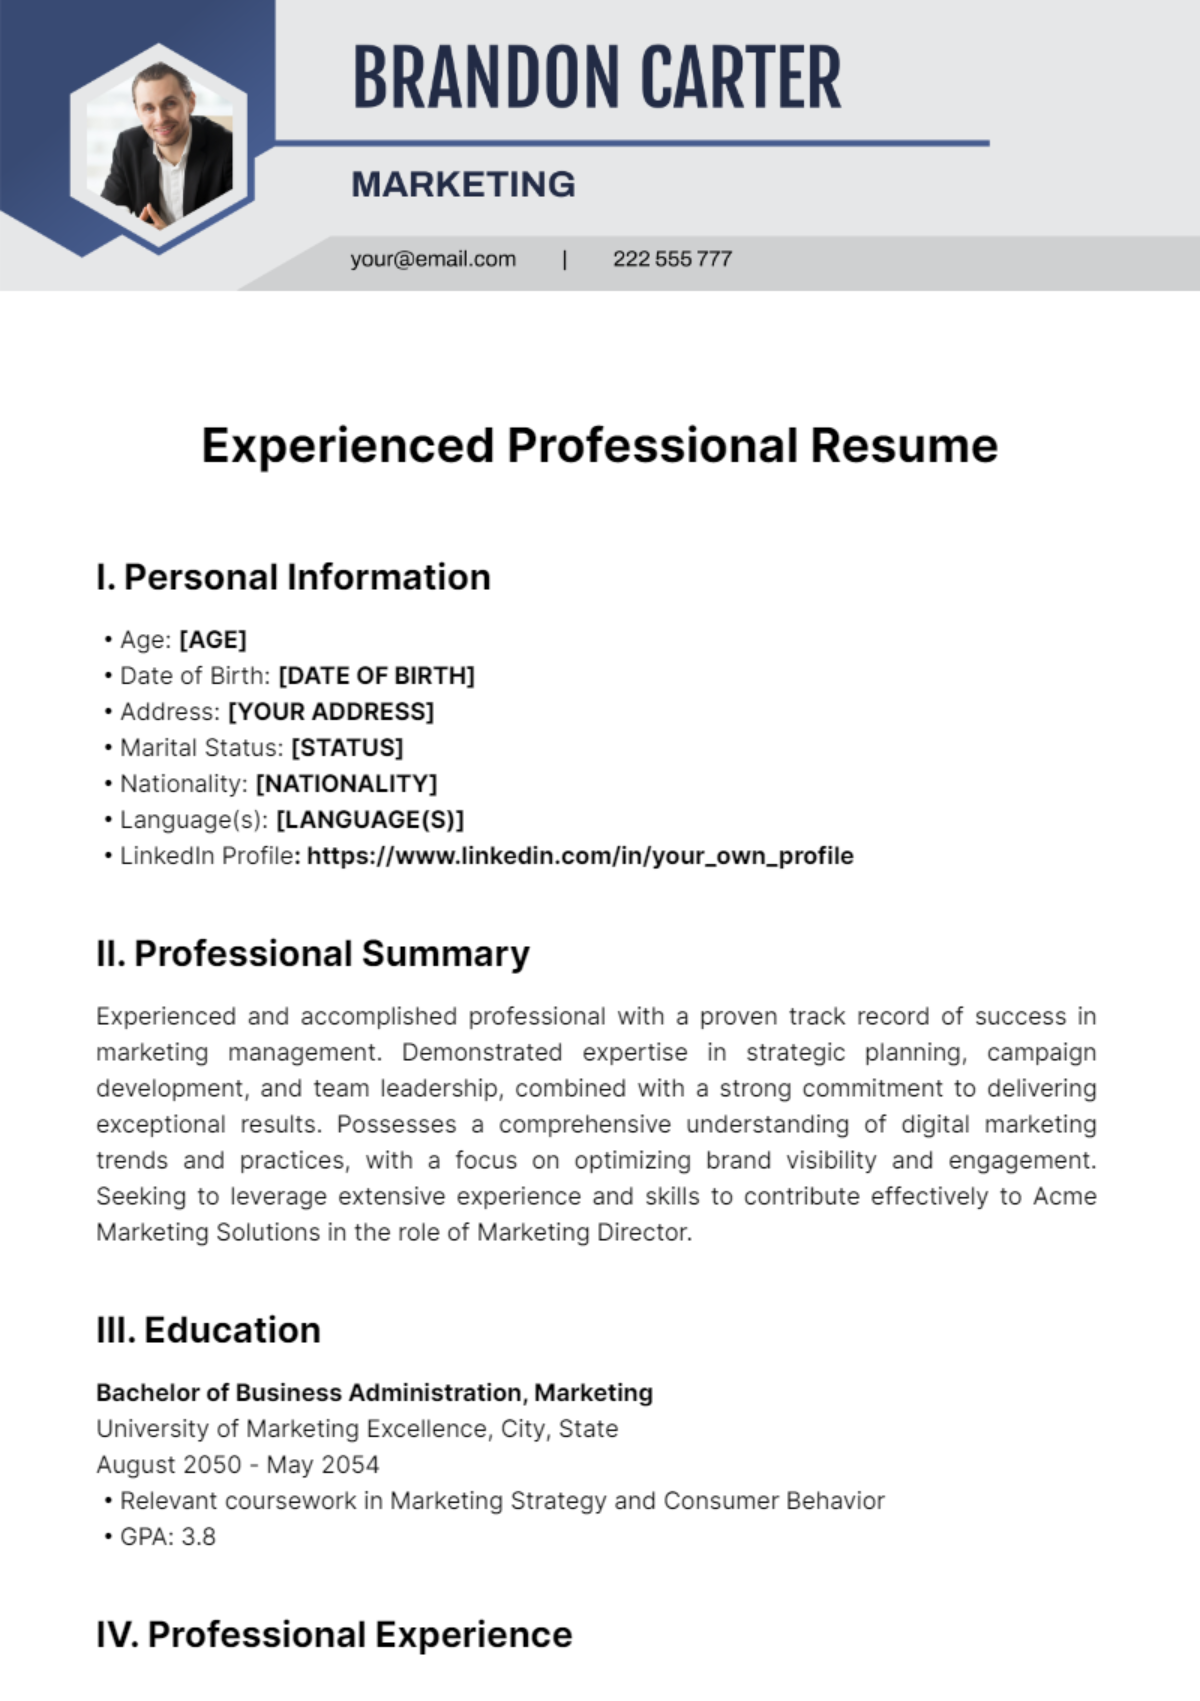 Experienced Professional Resume Template